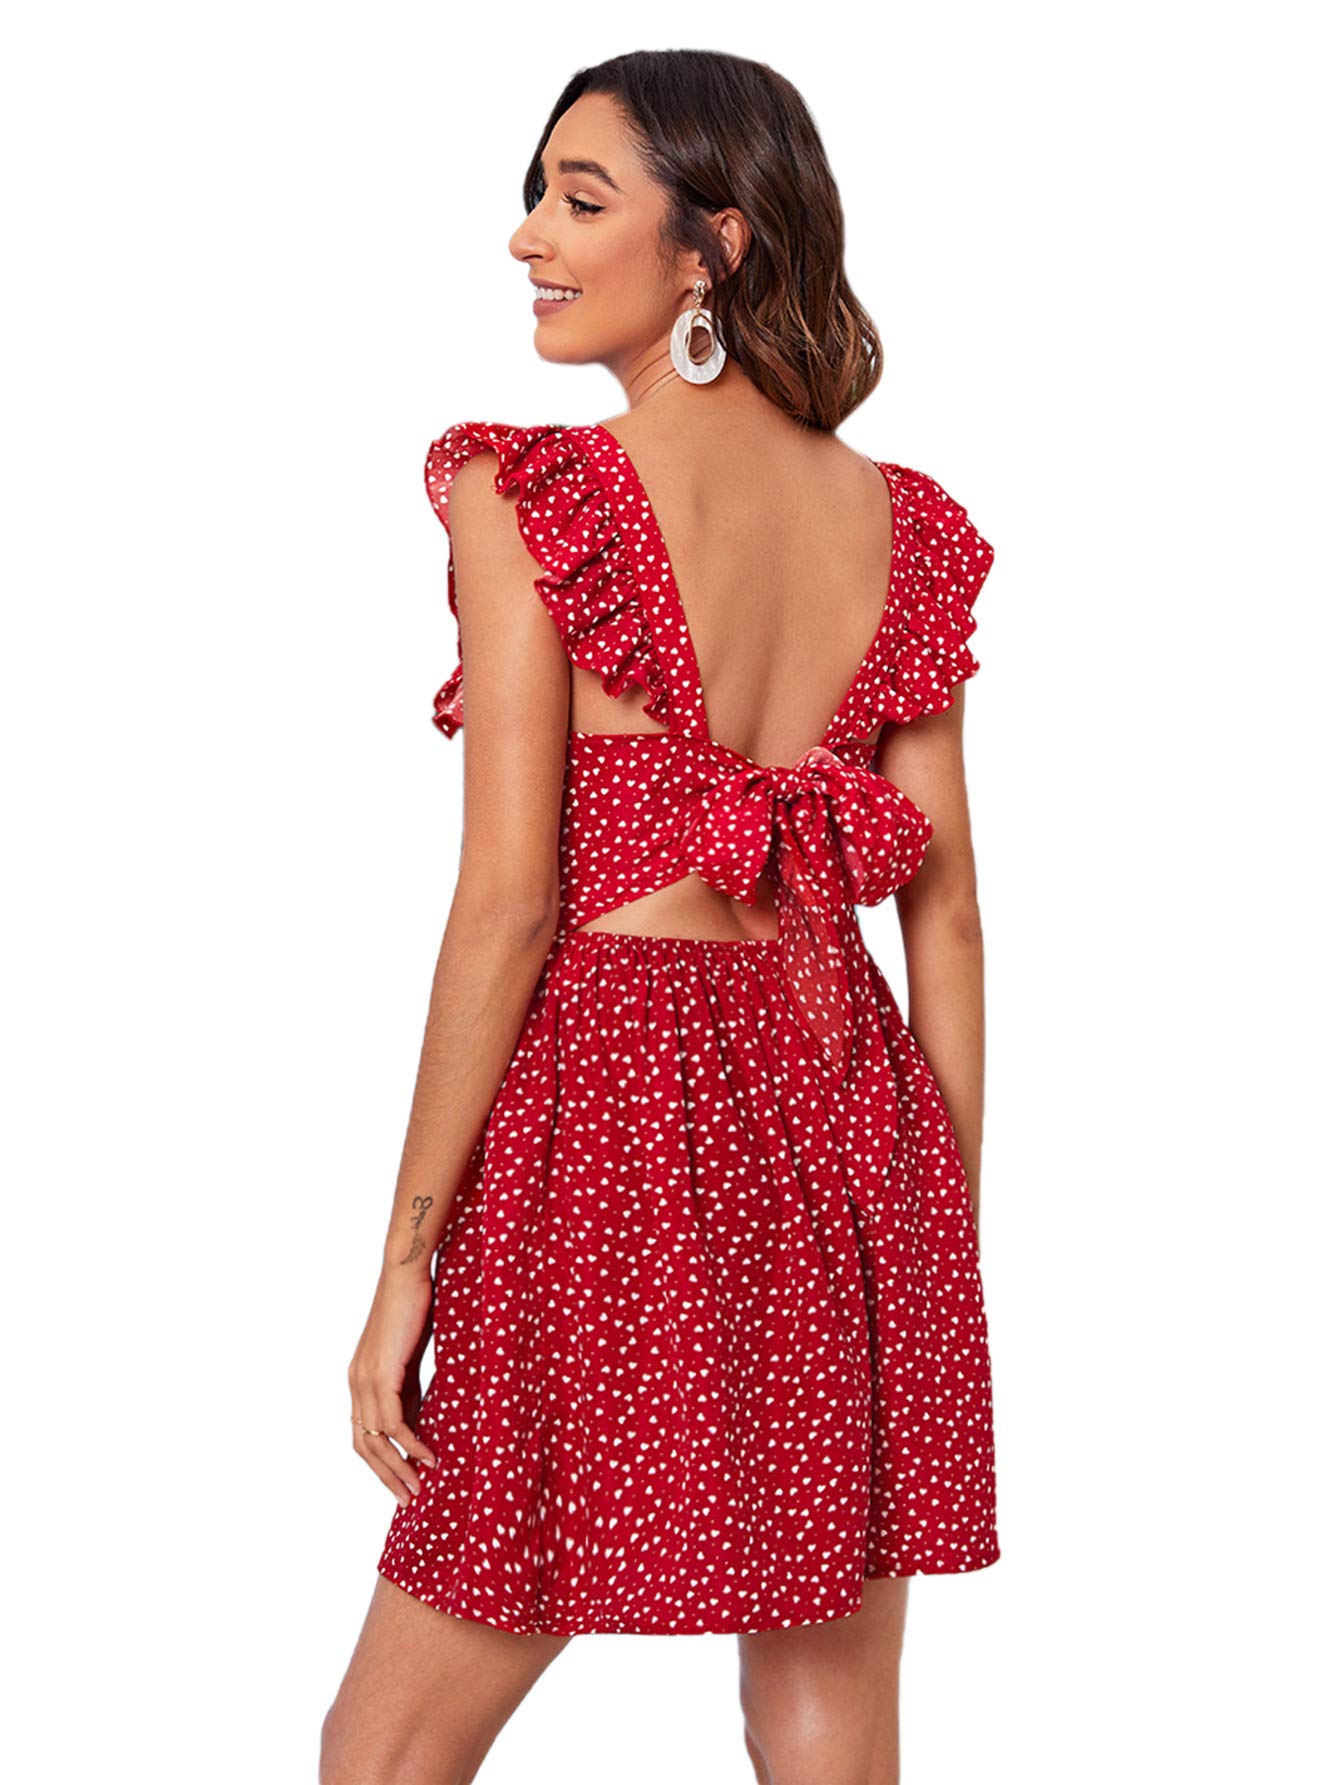 Backless, Cut Out Summer Dresses 2021